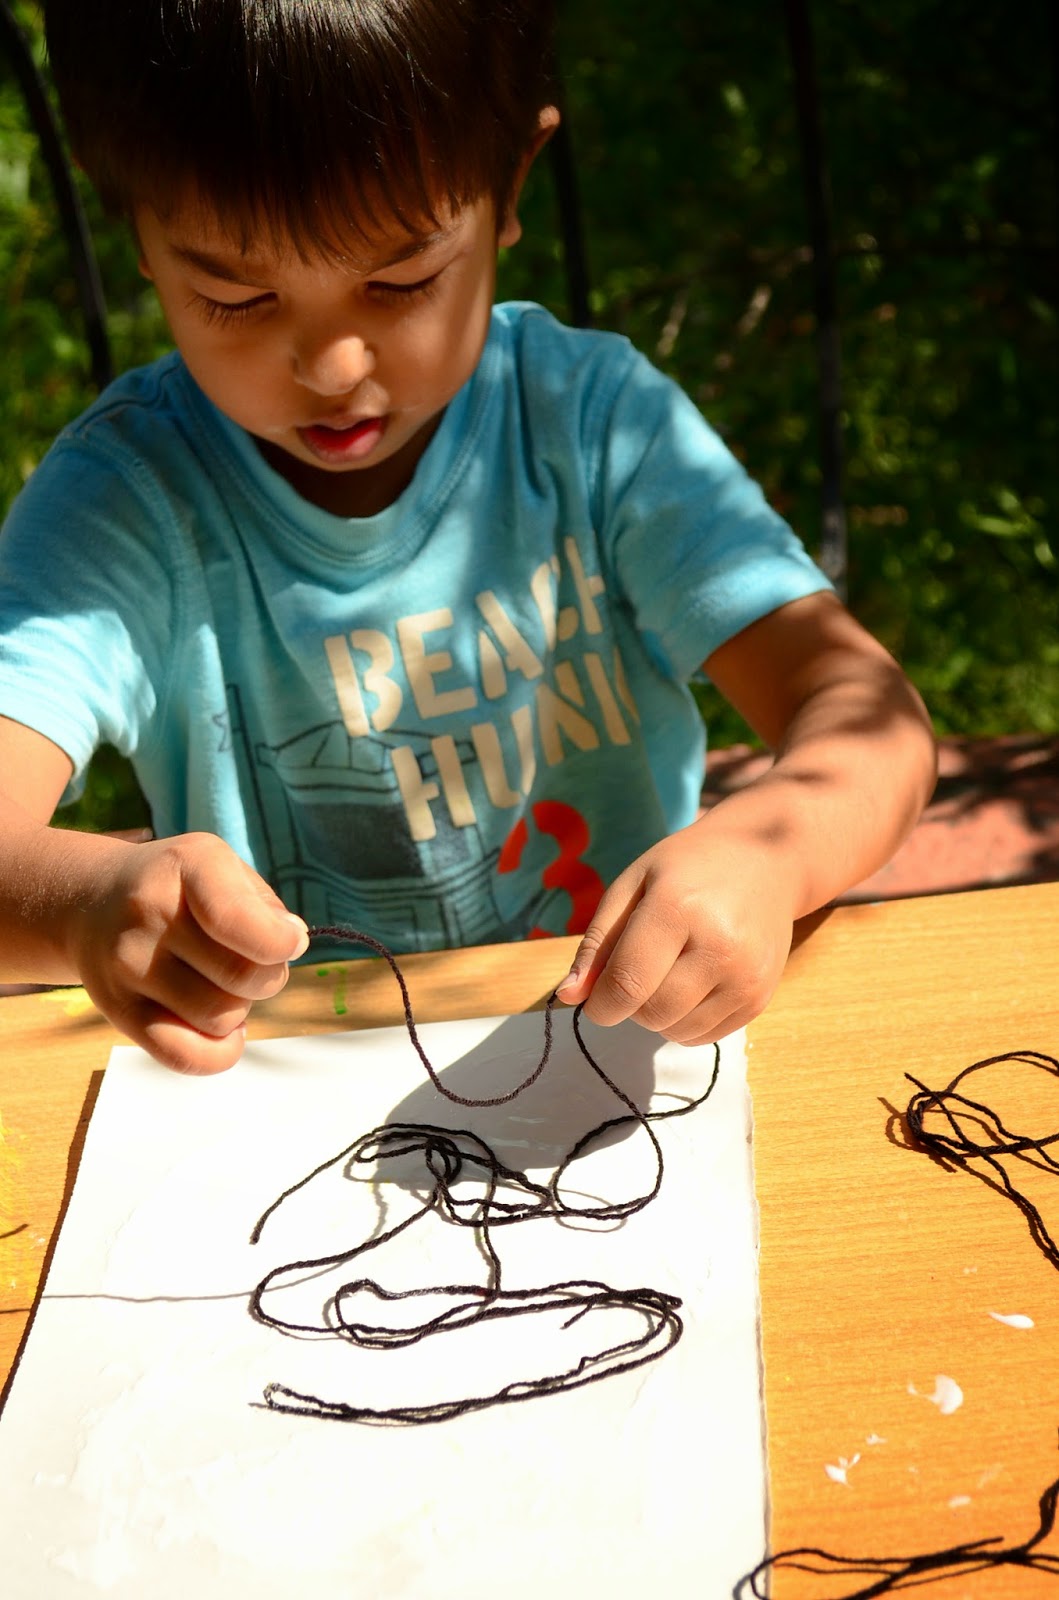 Kids Activity: Painting with Yarn